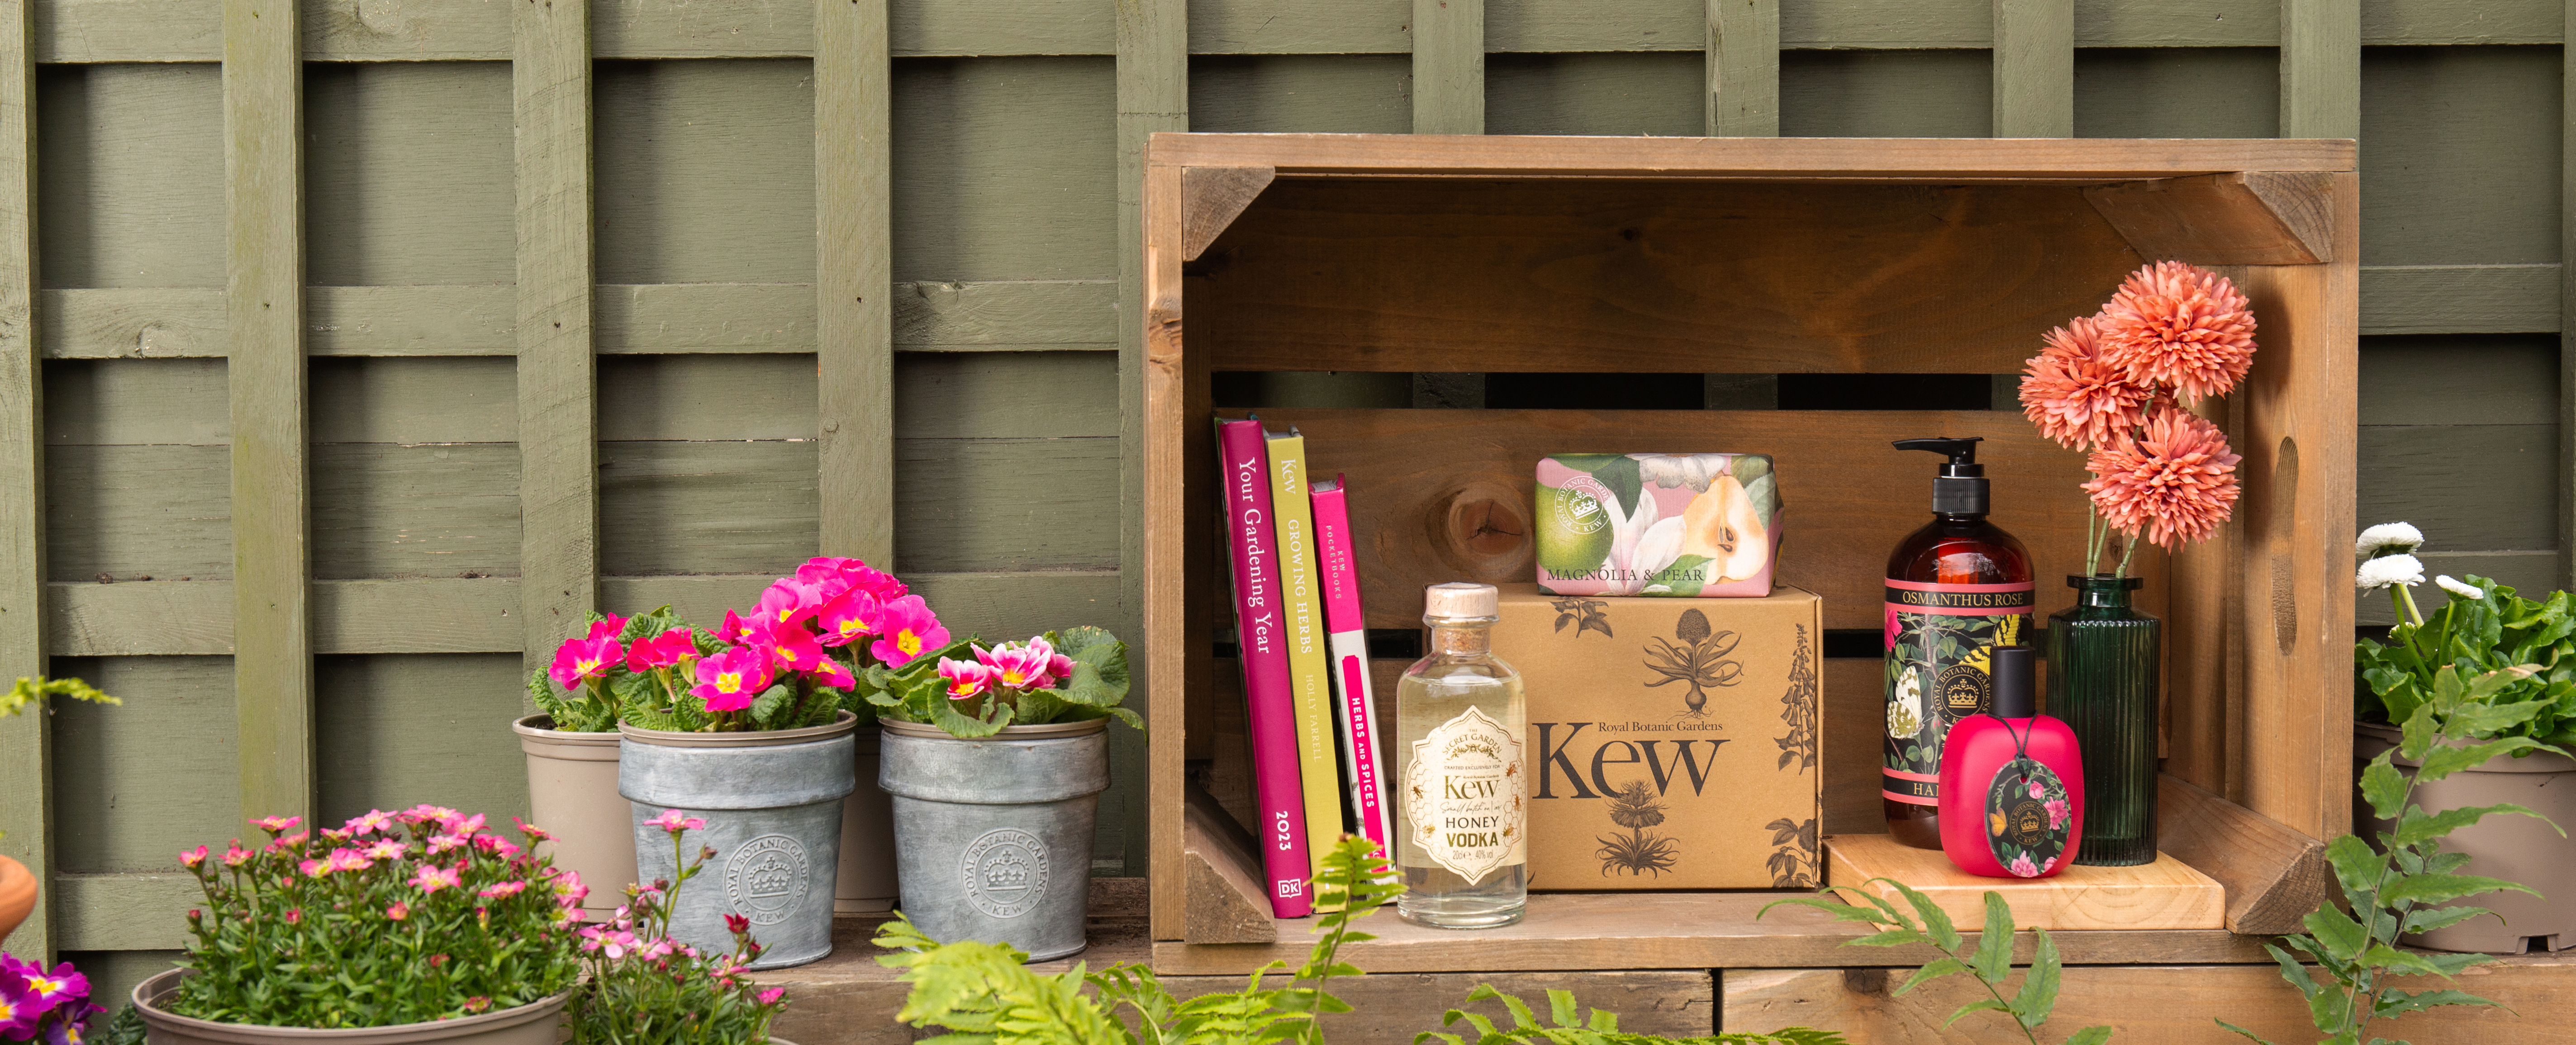 Attractive arrangement of pot plants, gardening books, Kew-branded toiletries and honey vodka in a wooden box